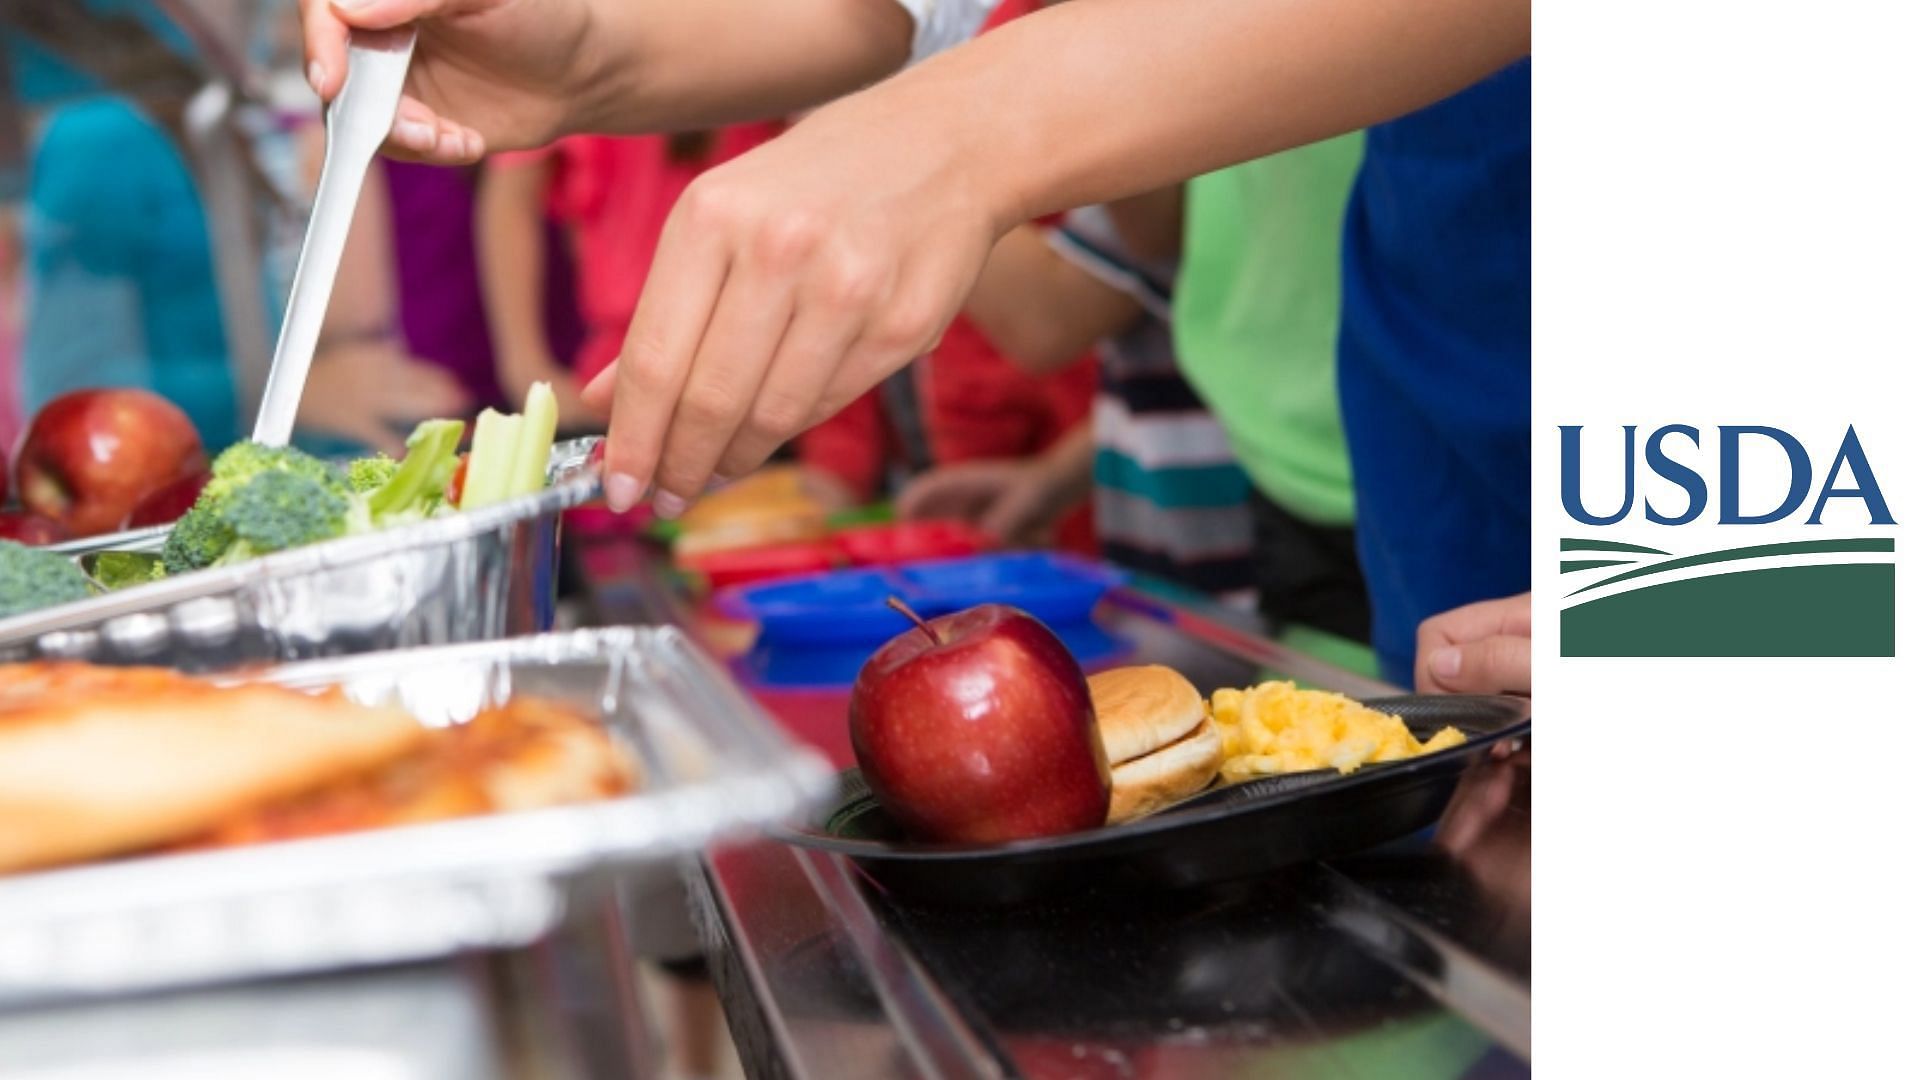 USDA announced new nutritional standard limits focused on making school meals more nutritious (Image via SDI Productions/Getty Images)